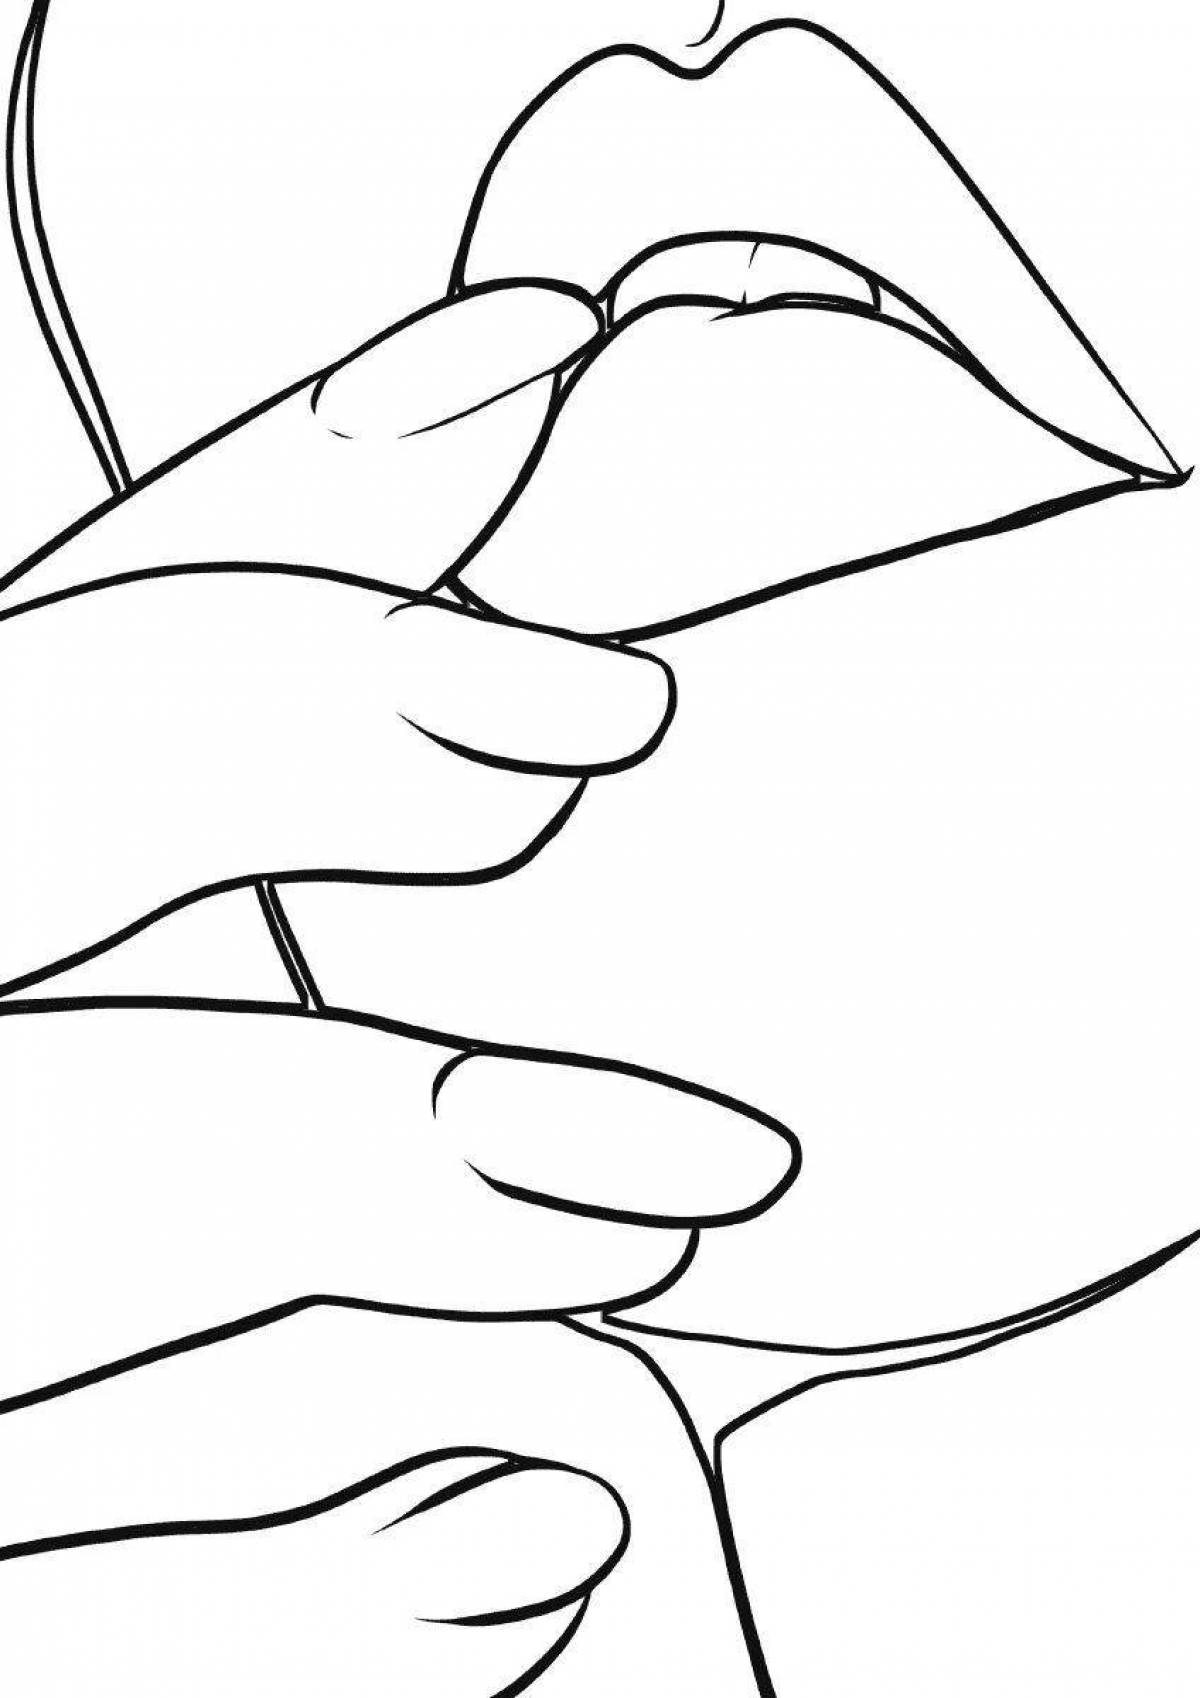 Coloring book shiny hand with long nails